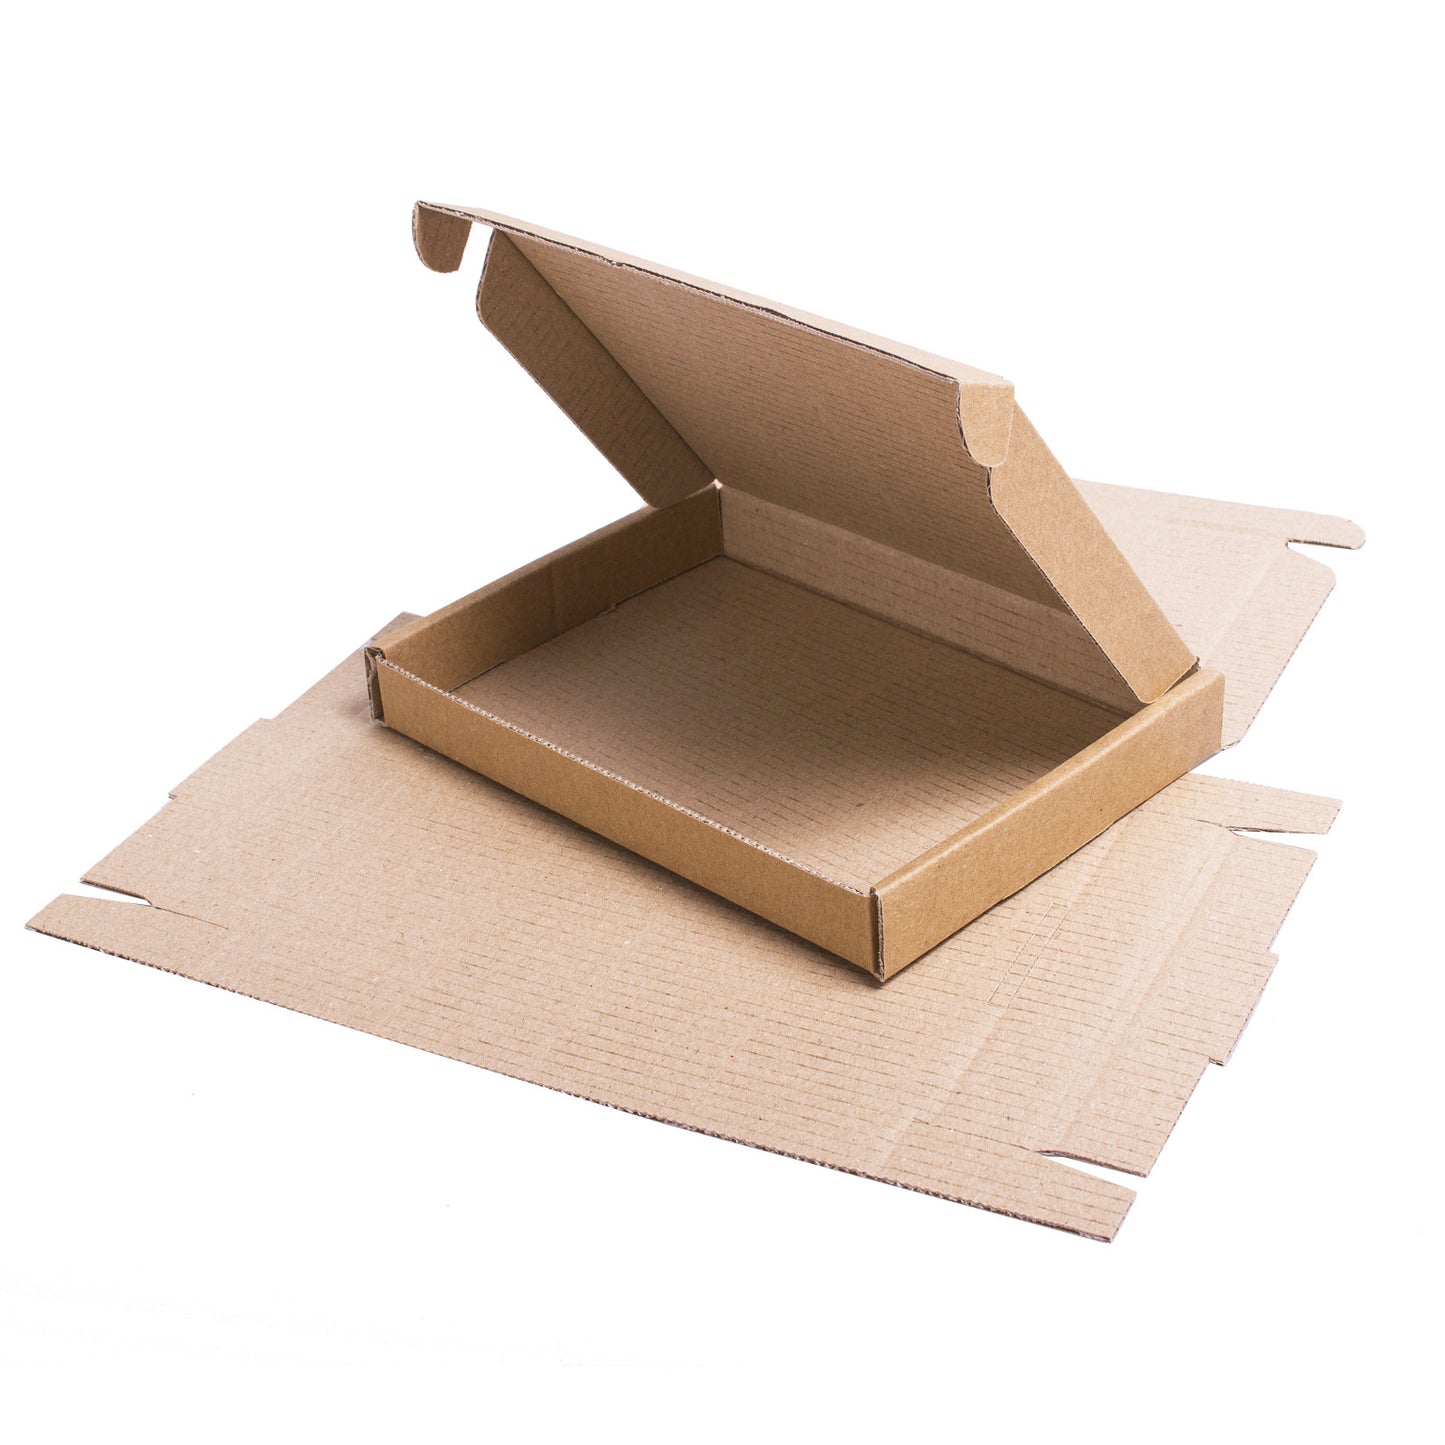 C6/A6 Royal Mail Large Letter PiP Cardboard Boxes,SR Mailing,